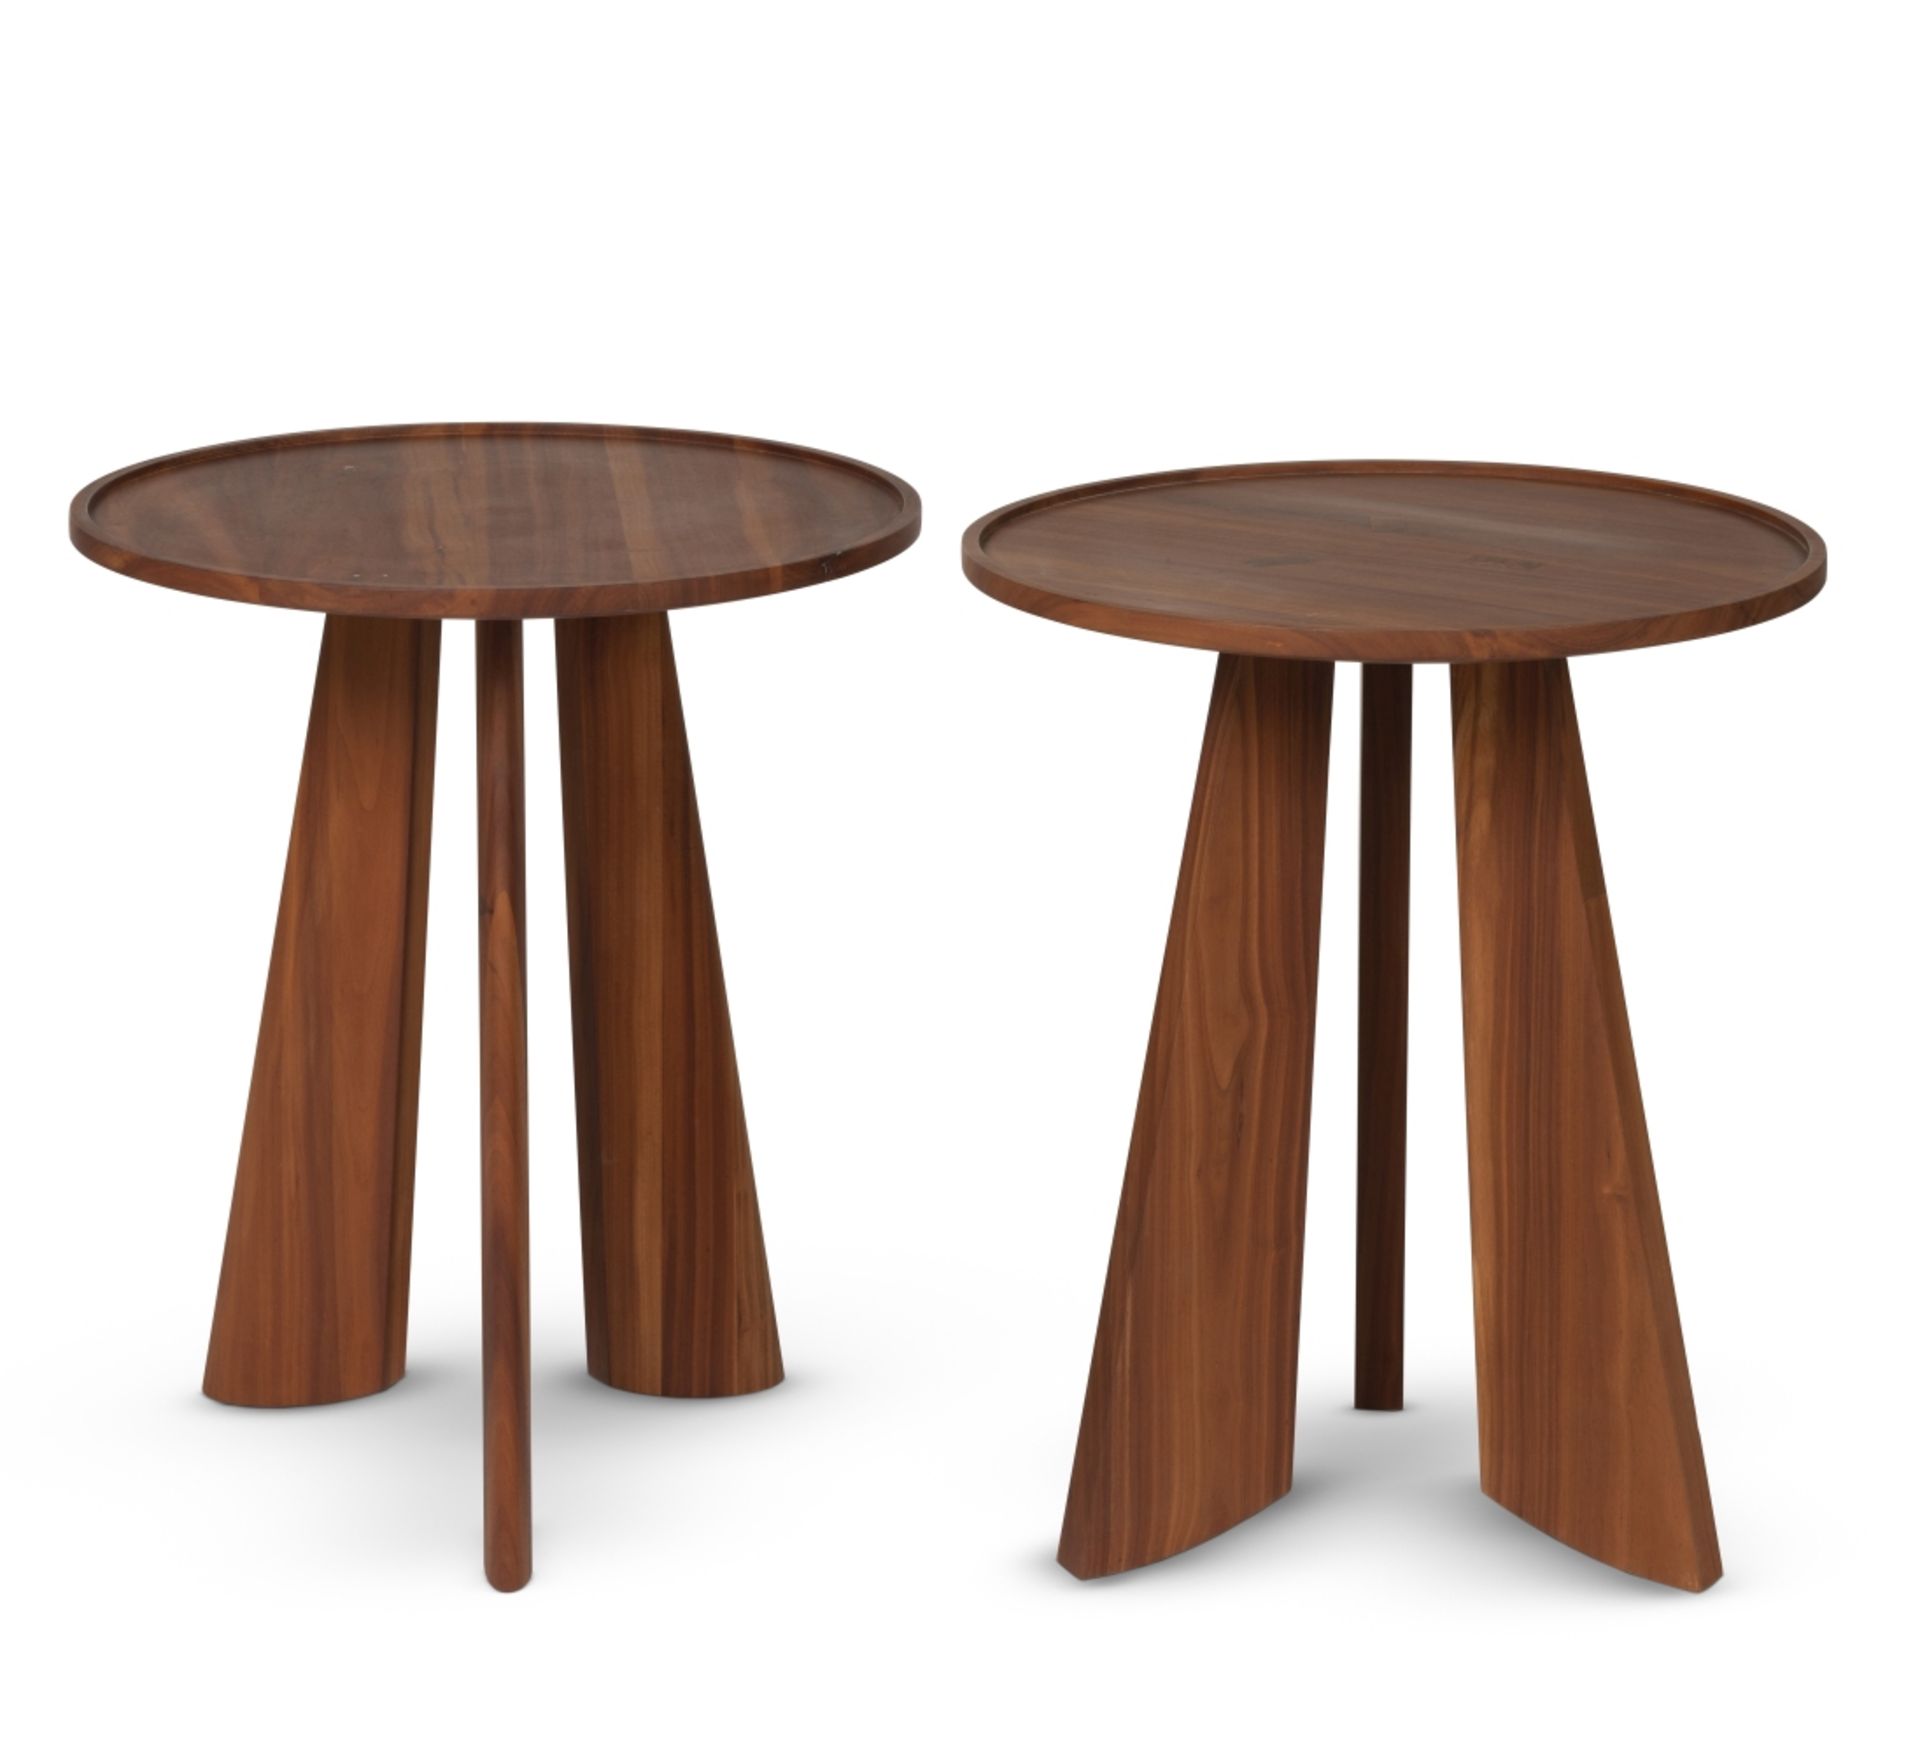 Two similar prototype 'three fin' plumwood occasional tablesDesigned by Sir Terence Conran (2)